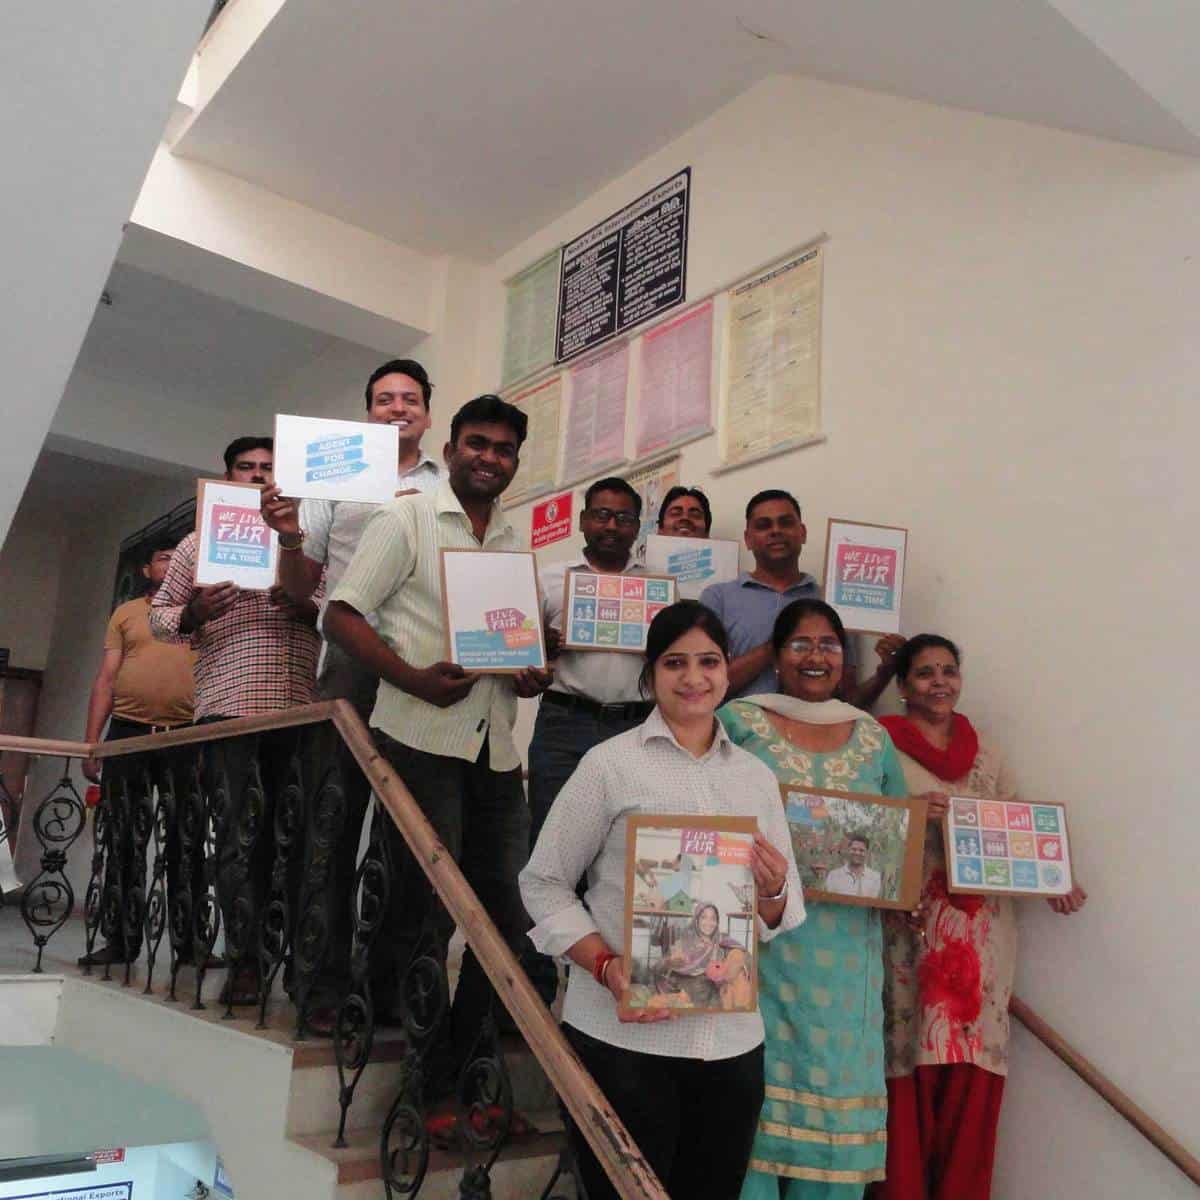 A group of people on a fair trade staircase holding up pictures.